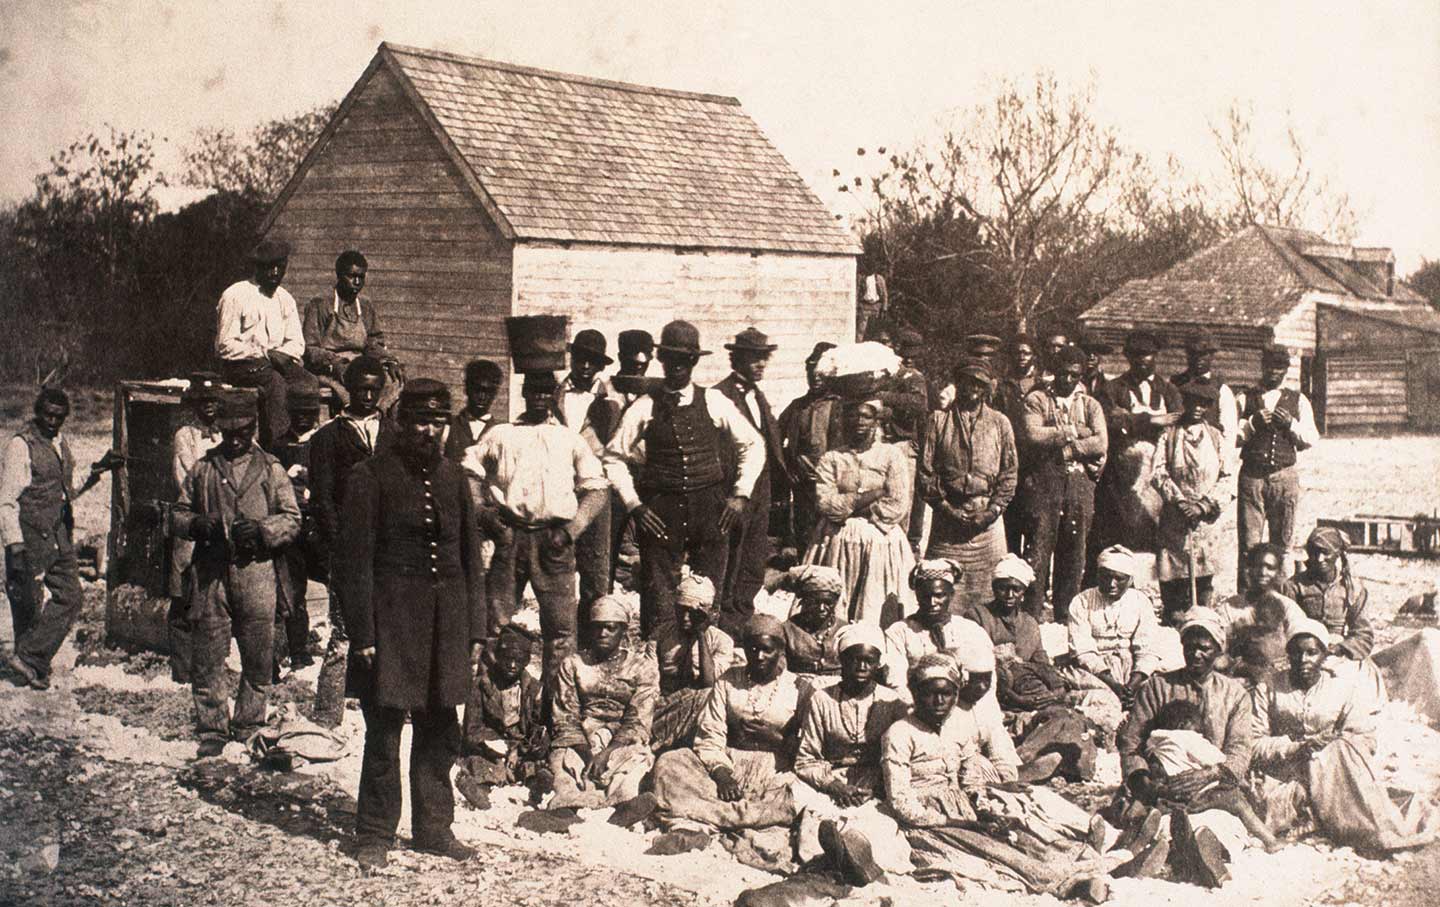 Photograph From 1862. A group of African Americans in front of shacks